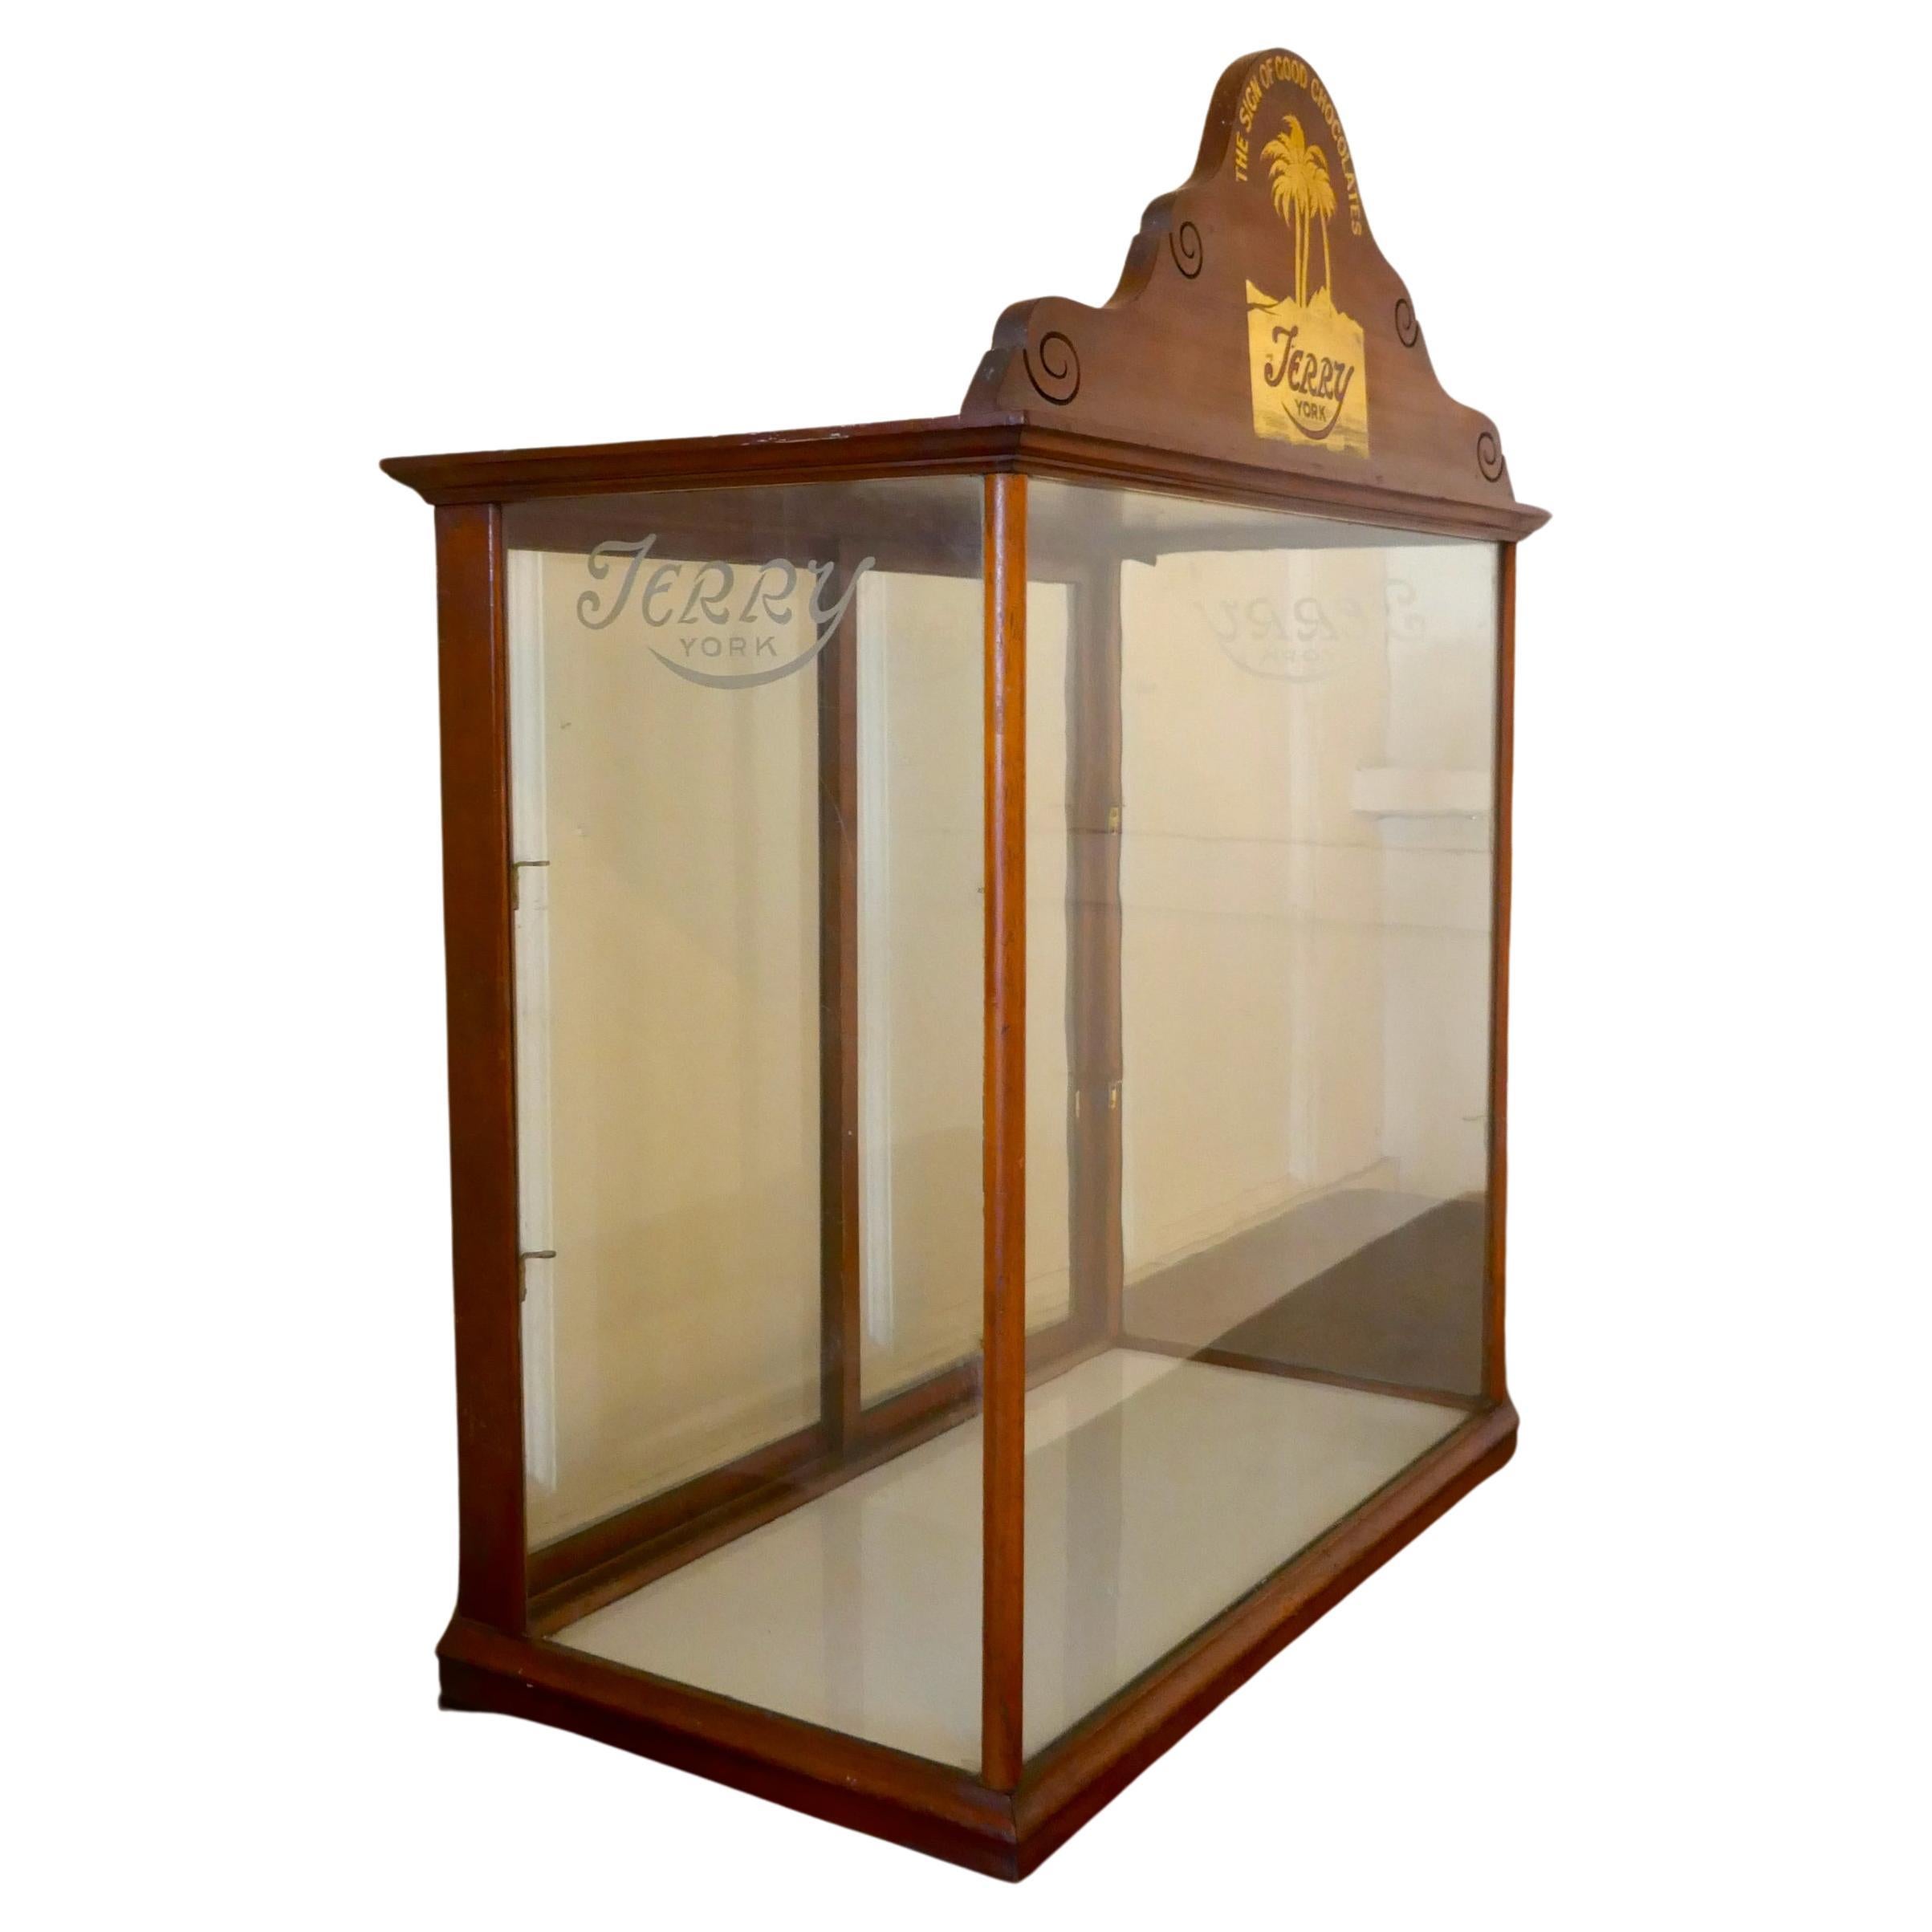 Terry’s of York Chocolate Confectionary Display Cabinet     For Sale